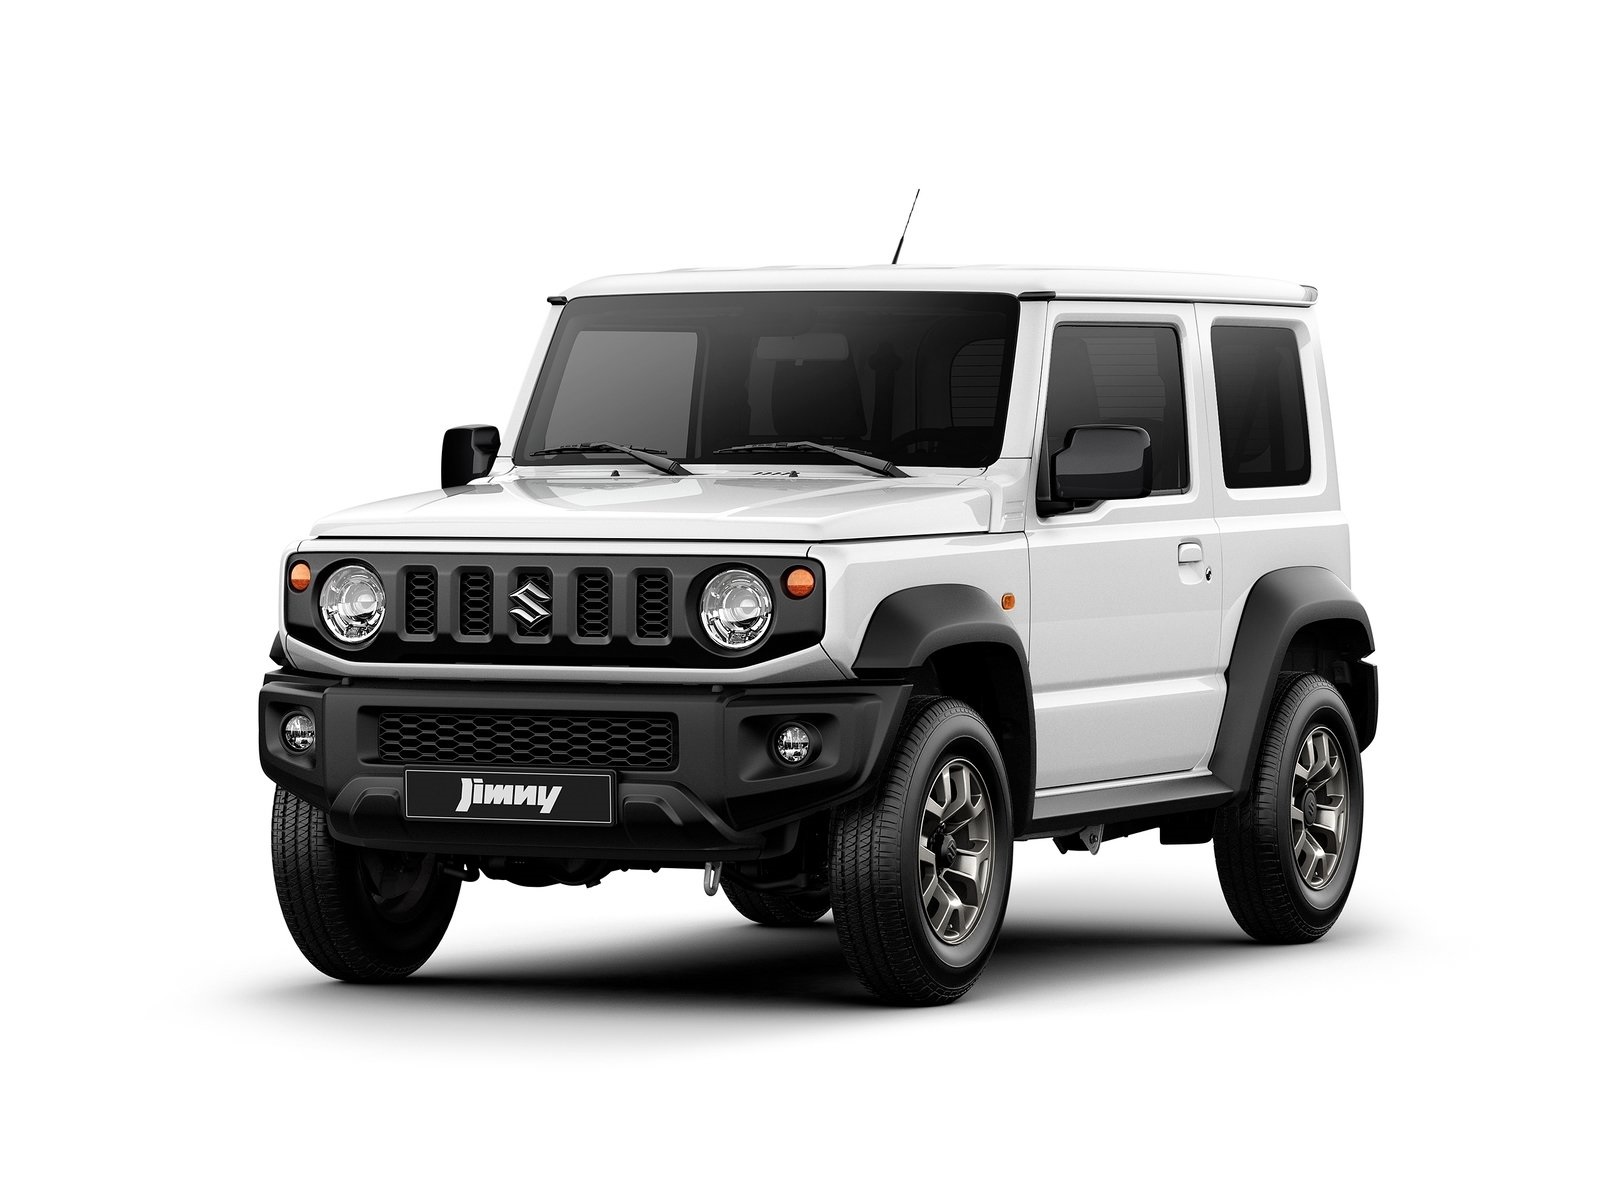 Suzuki Jimny accessories revealed: Decal kits, alloys and more